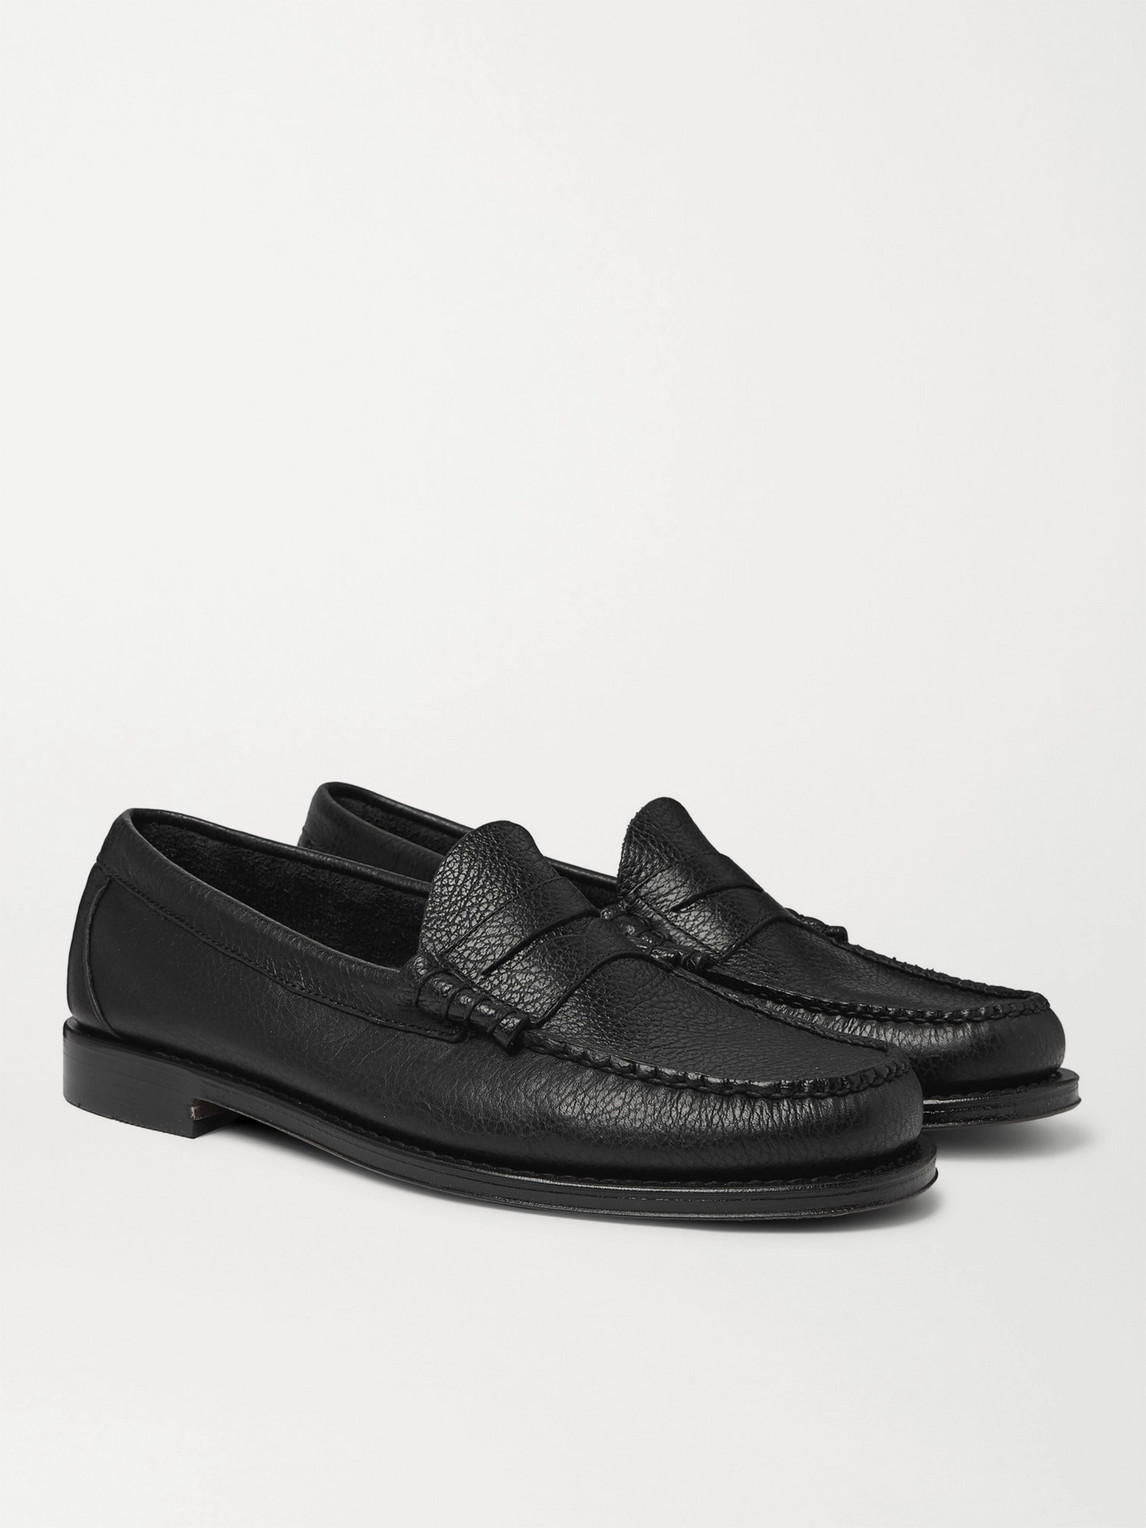 G.h. Bass & Co. Weejuns Heritage Larson Full-grain Leather Penny Loafers In Black